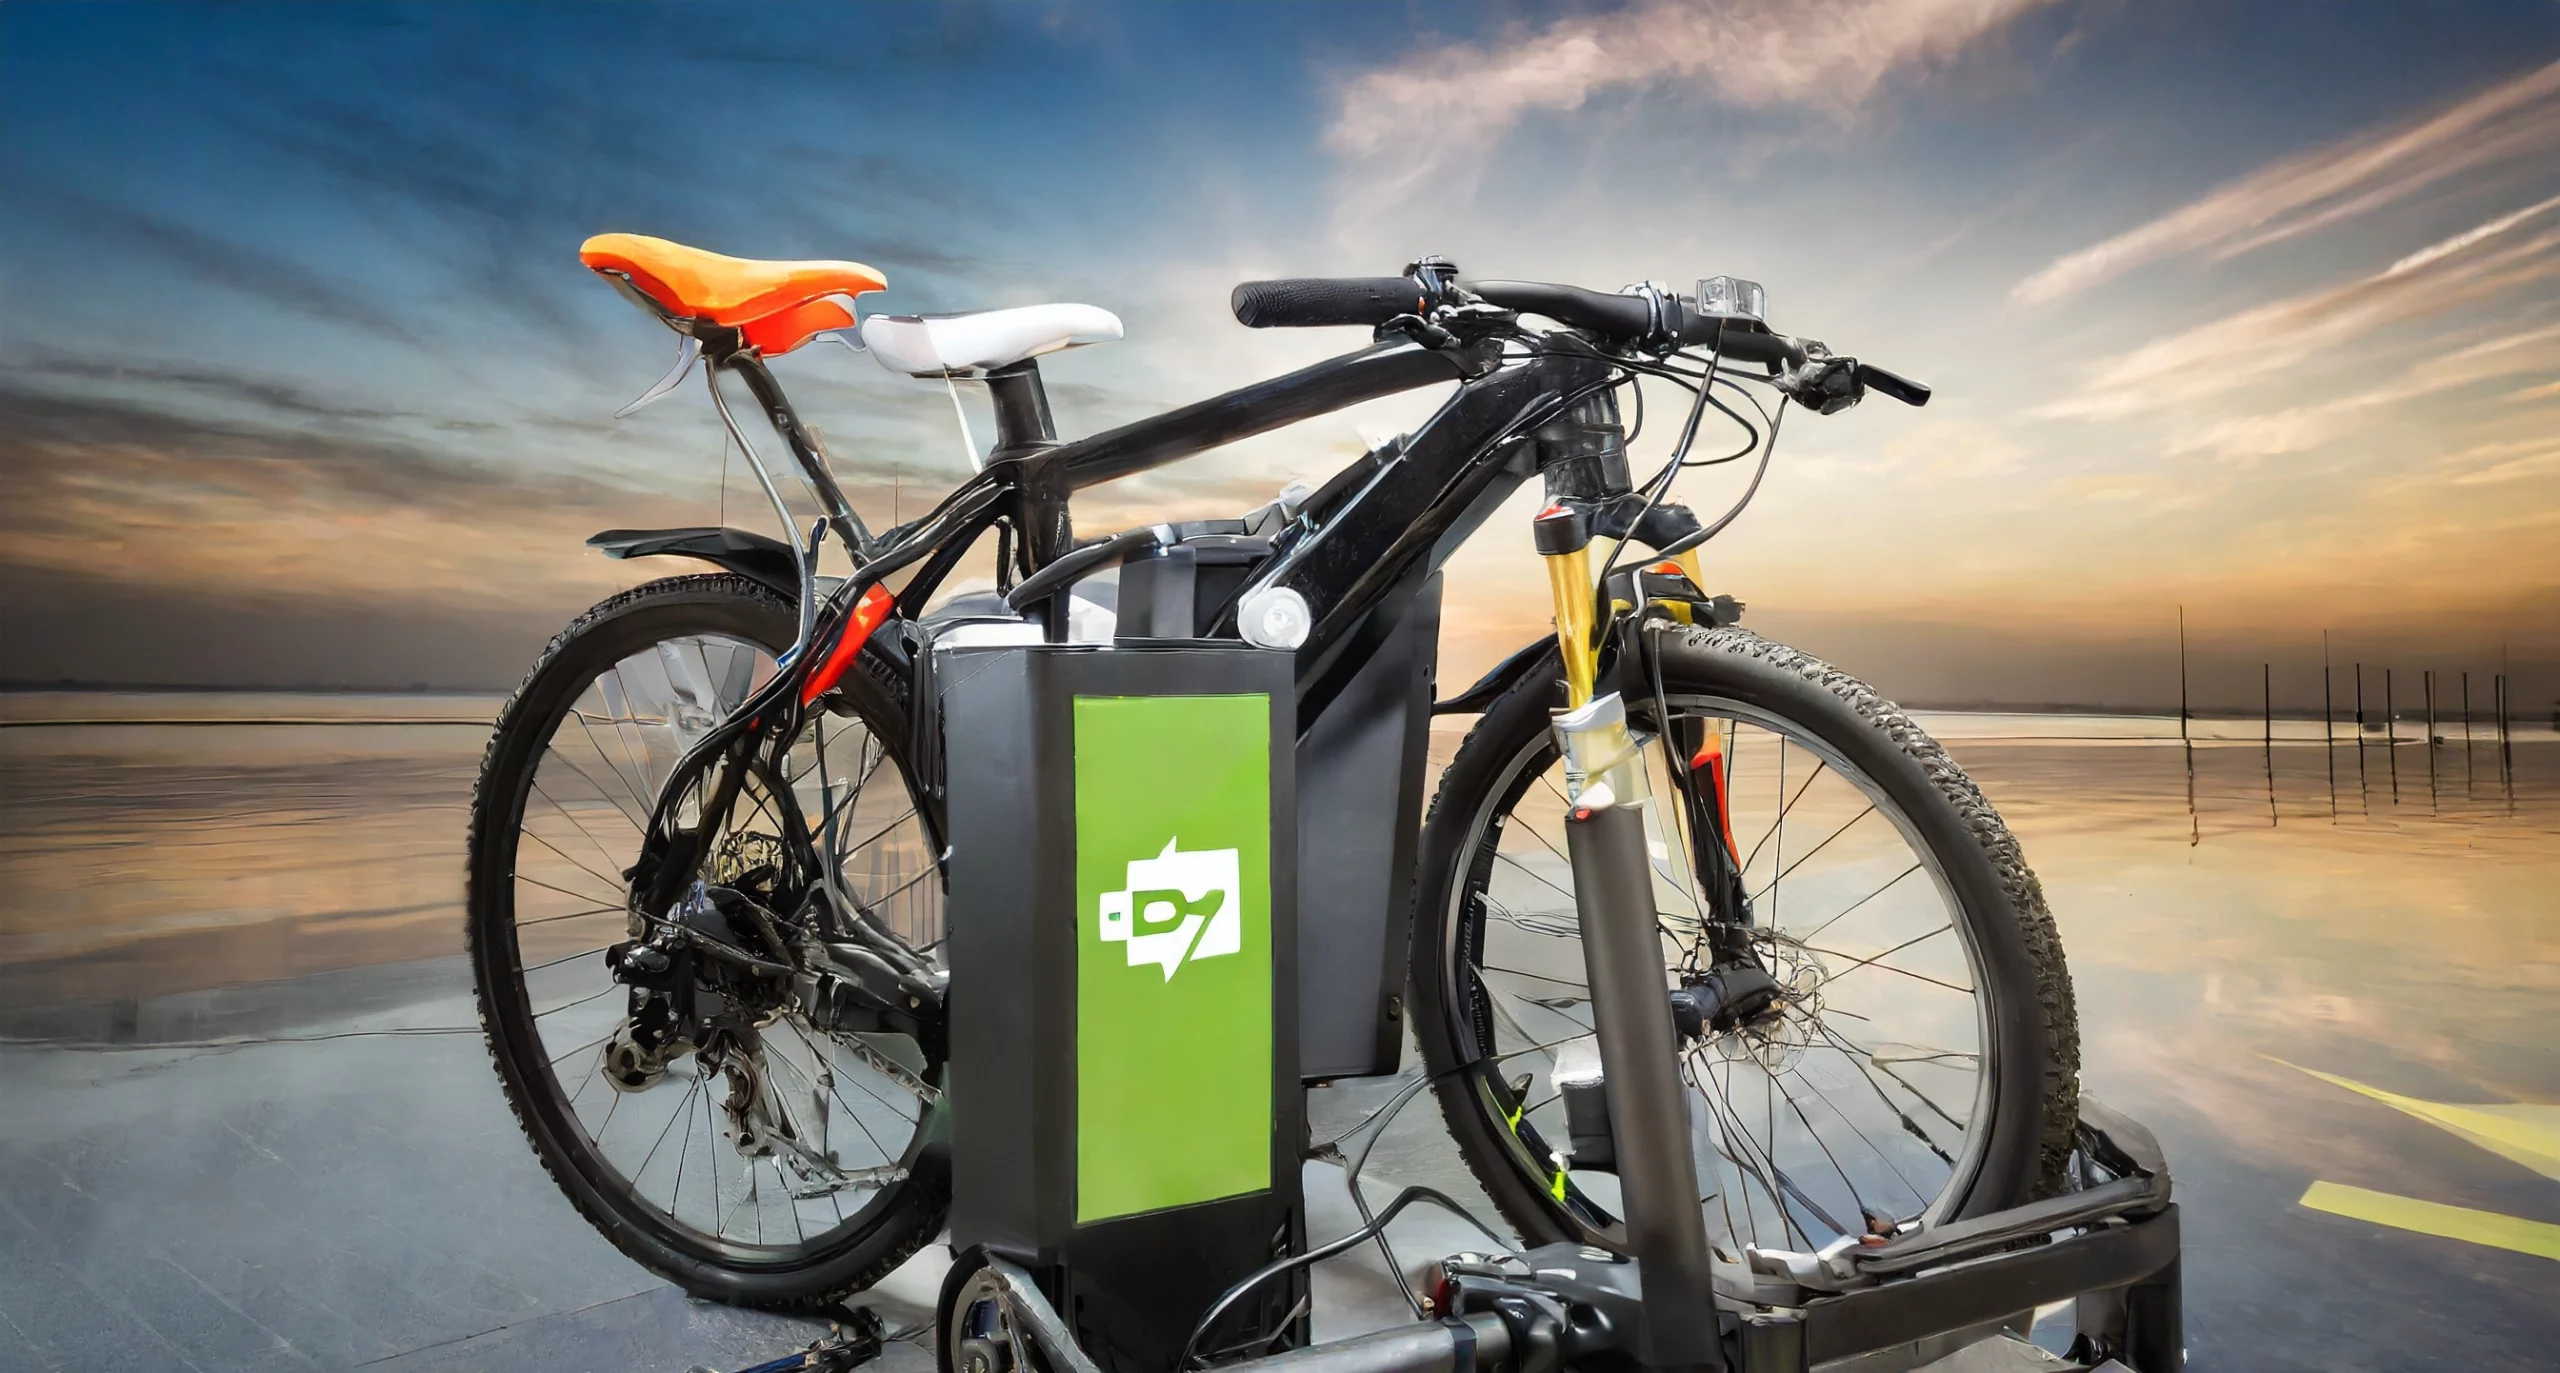 Can You Overcharge An Ebike Battery? Caring for An E-Bike Battery